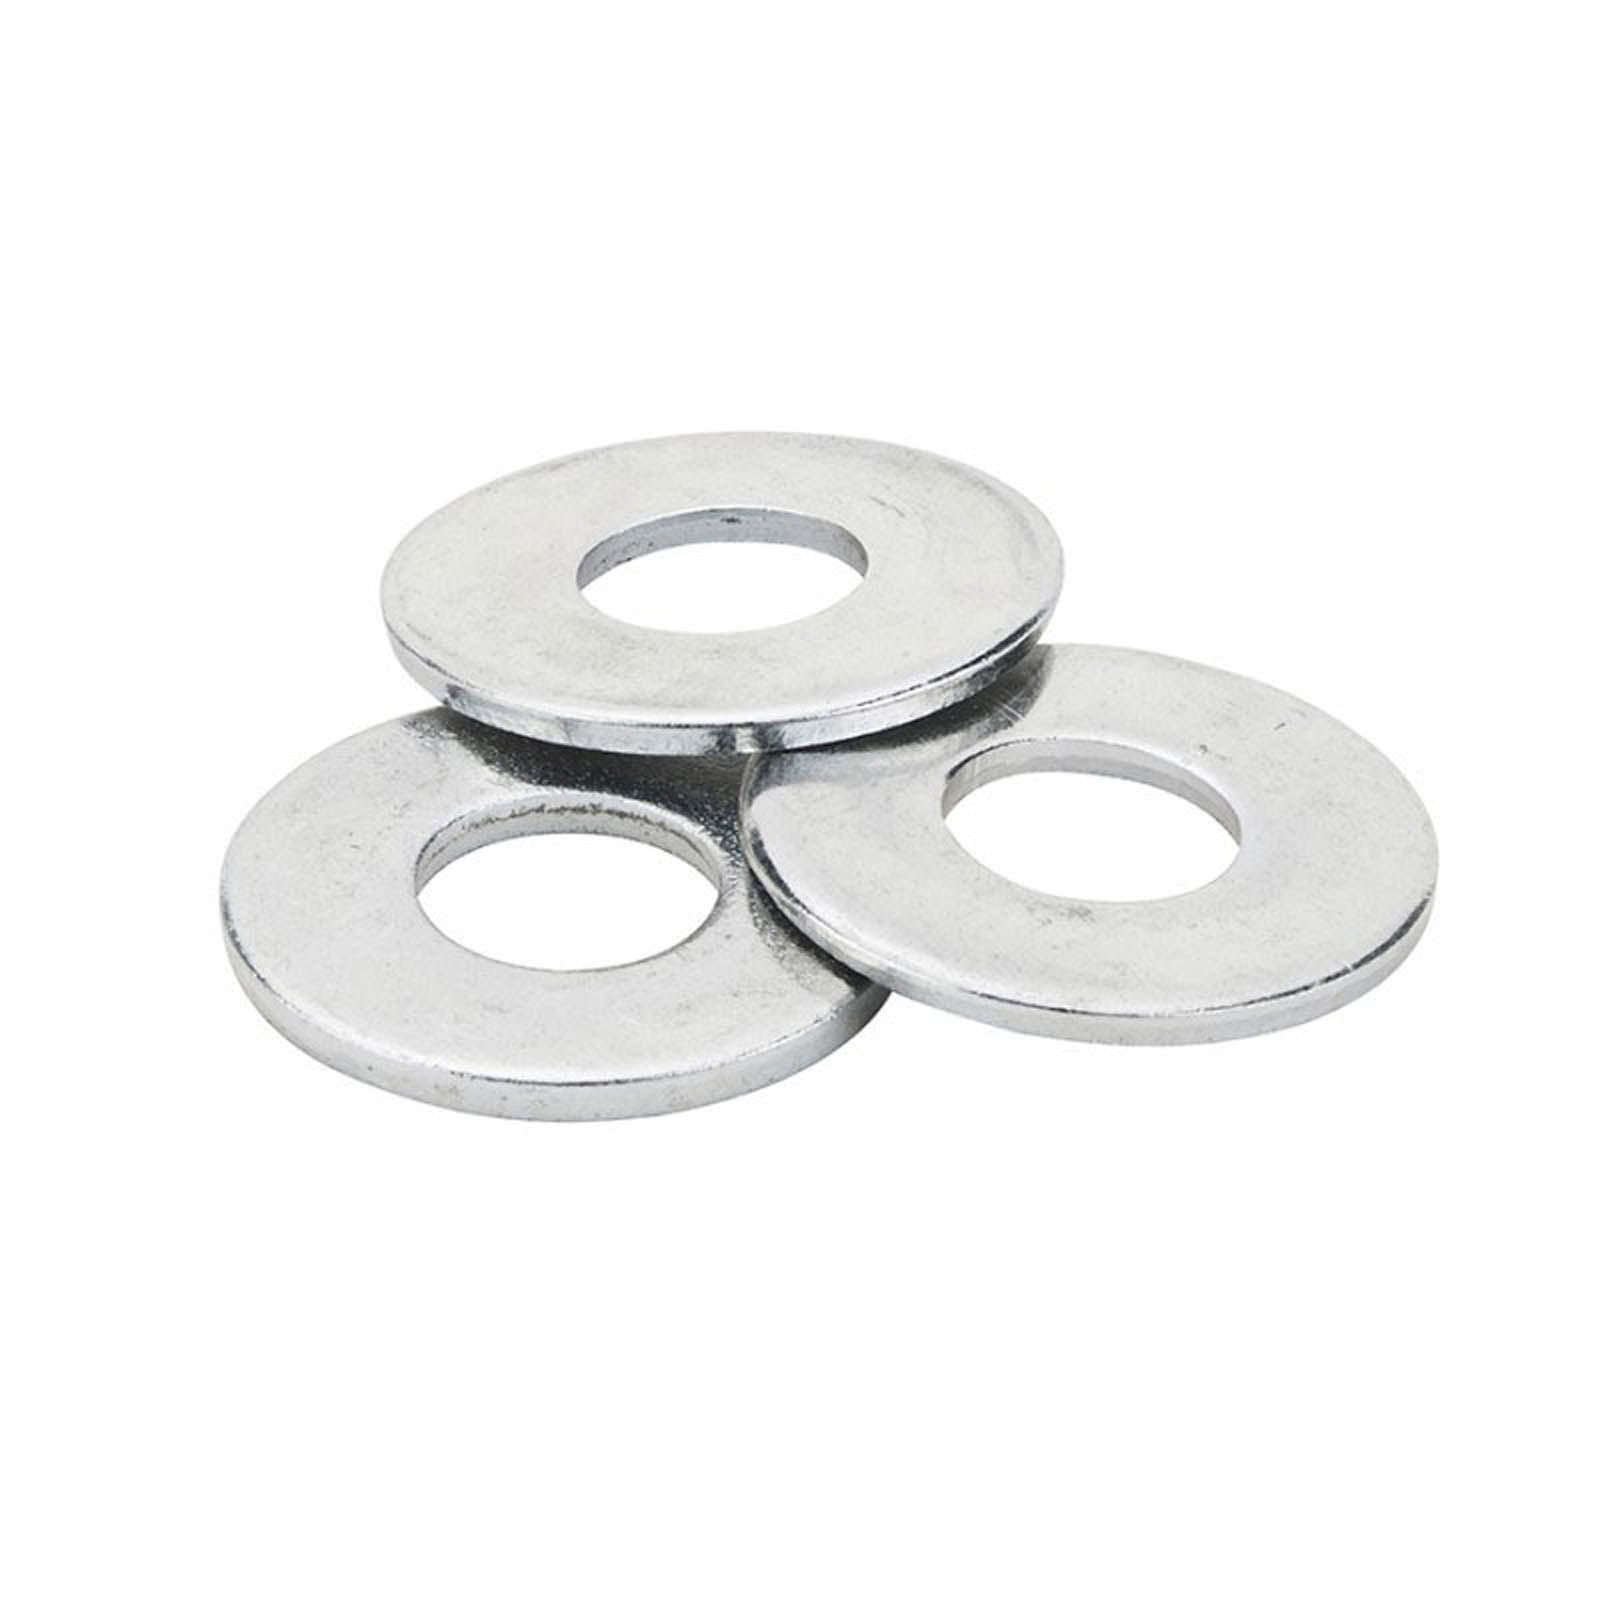 New WHITES Washer Flat Zinc Plated - 10mm (50 Pack) #HWW10